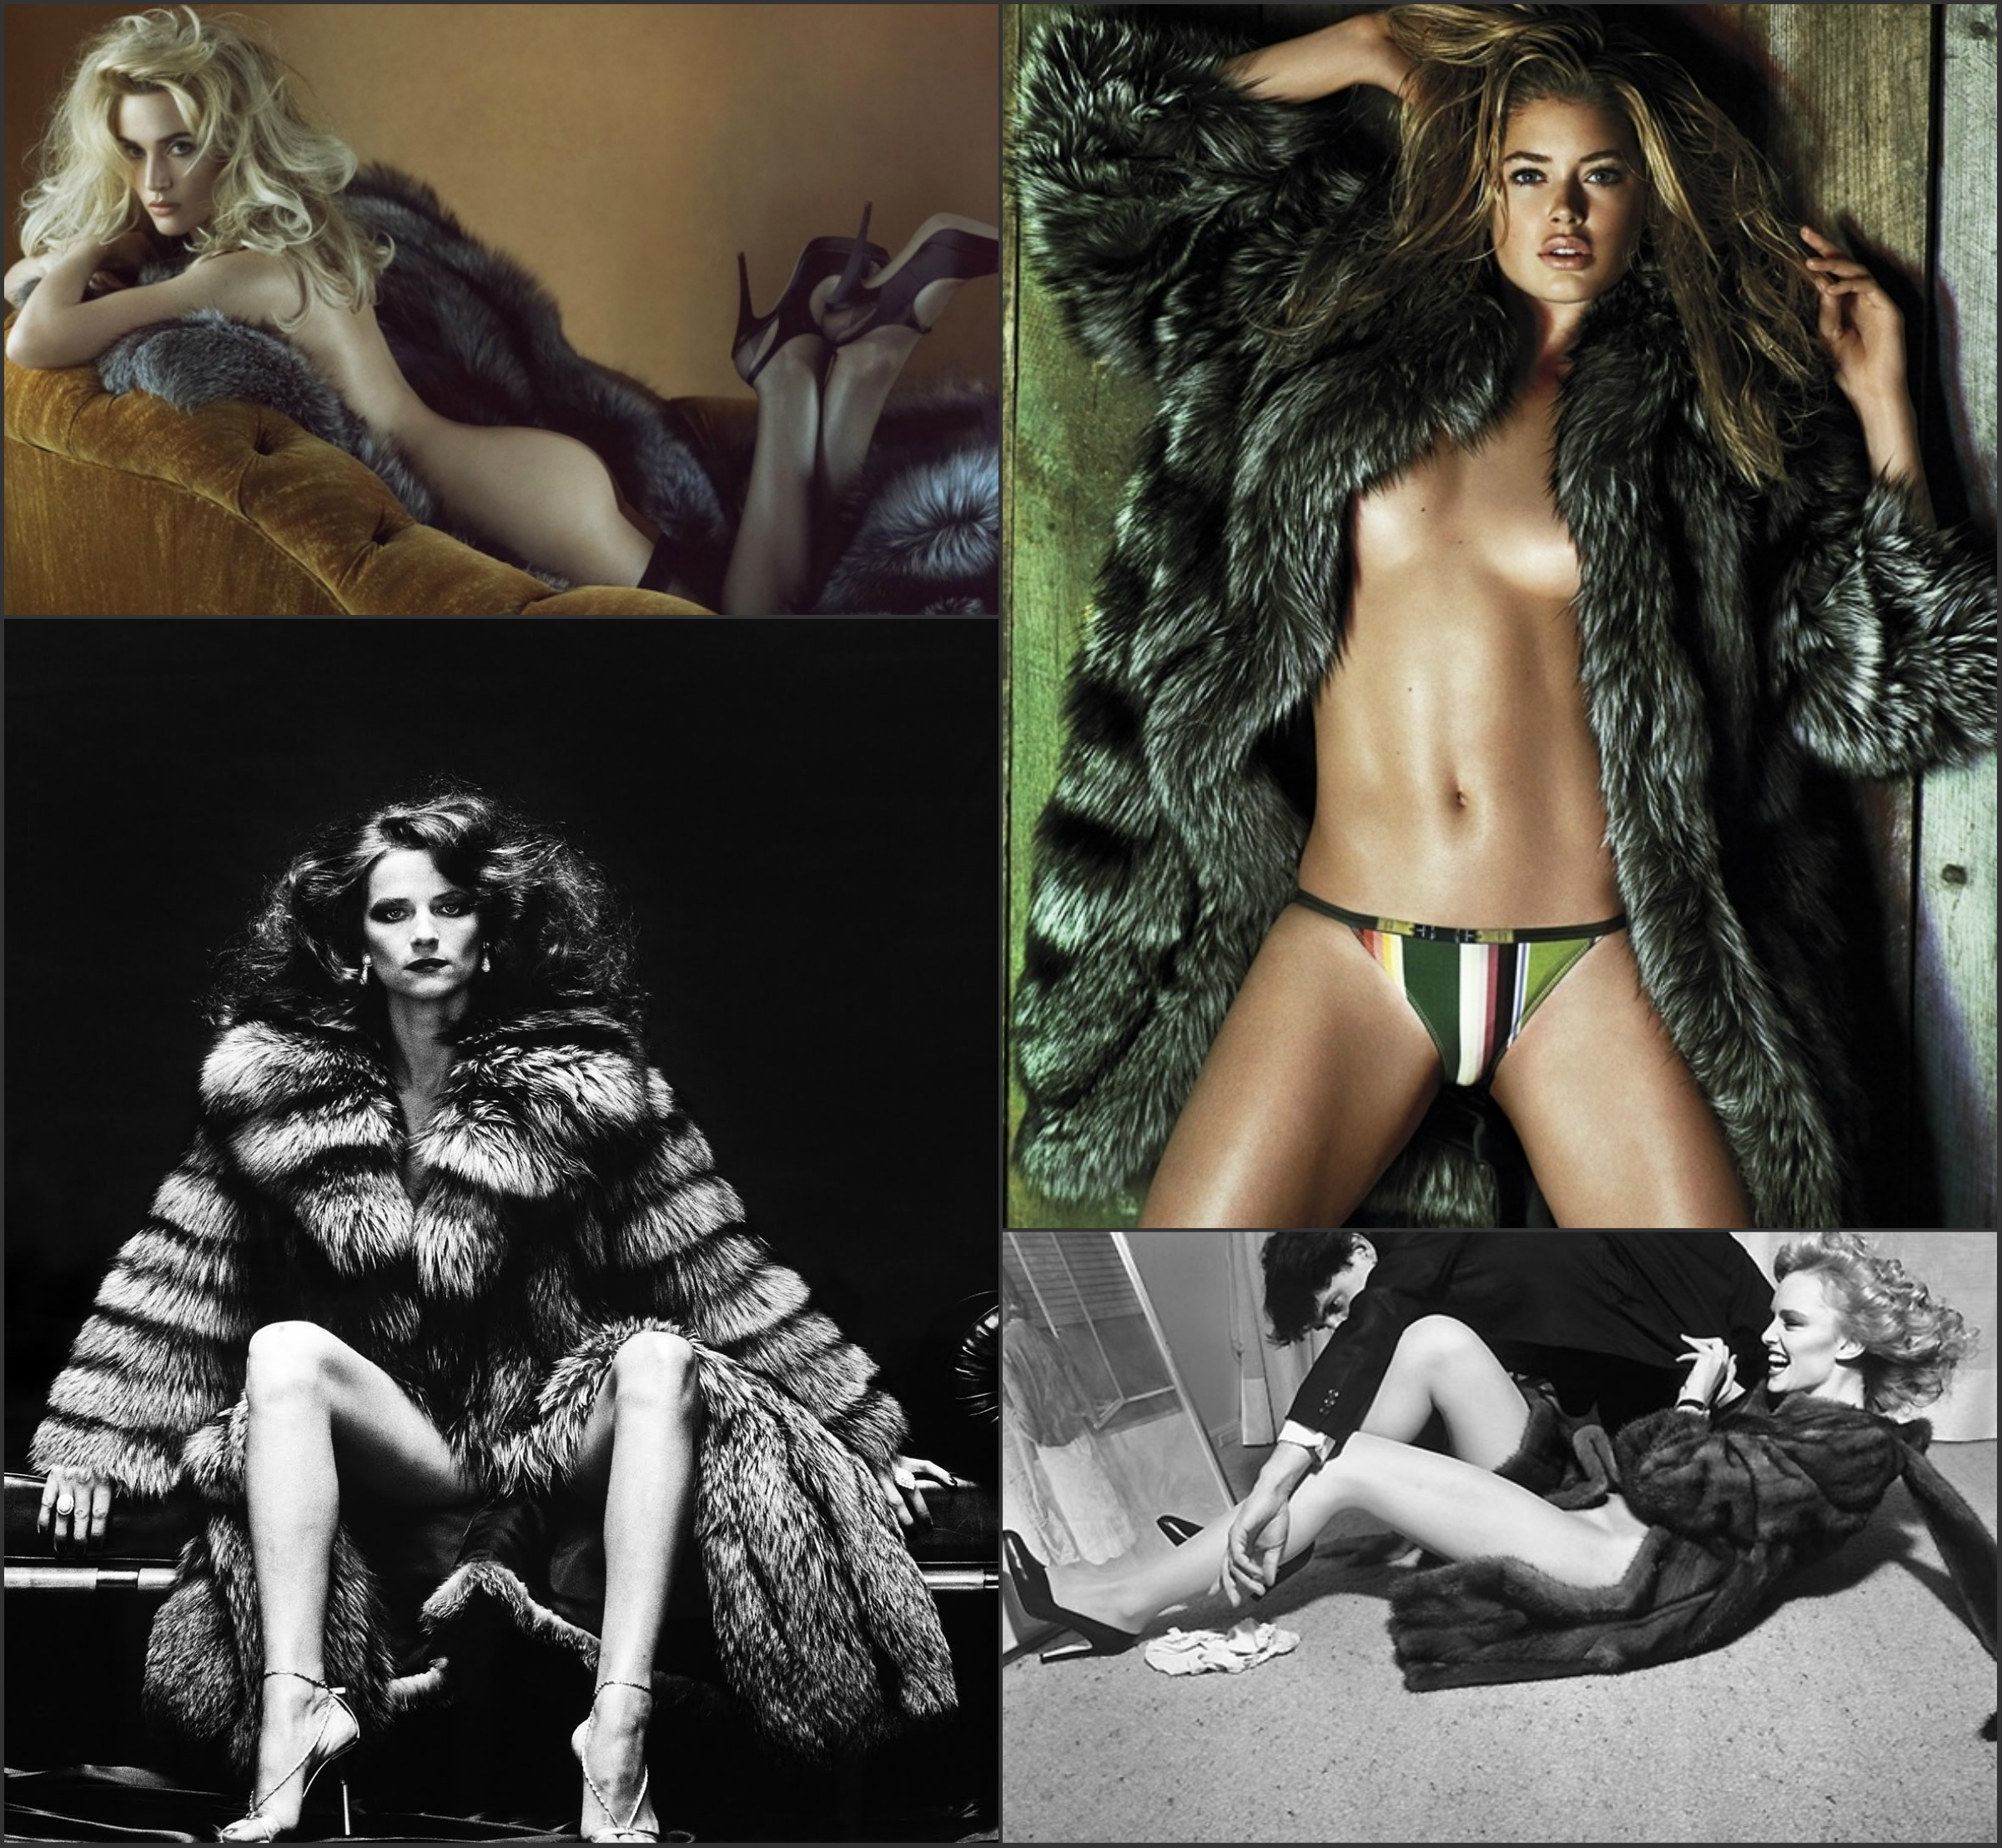 Nudist Sex - Sex and Nudity in Fashion Editorials (NSFW) | Beautifully ...